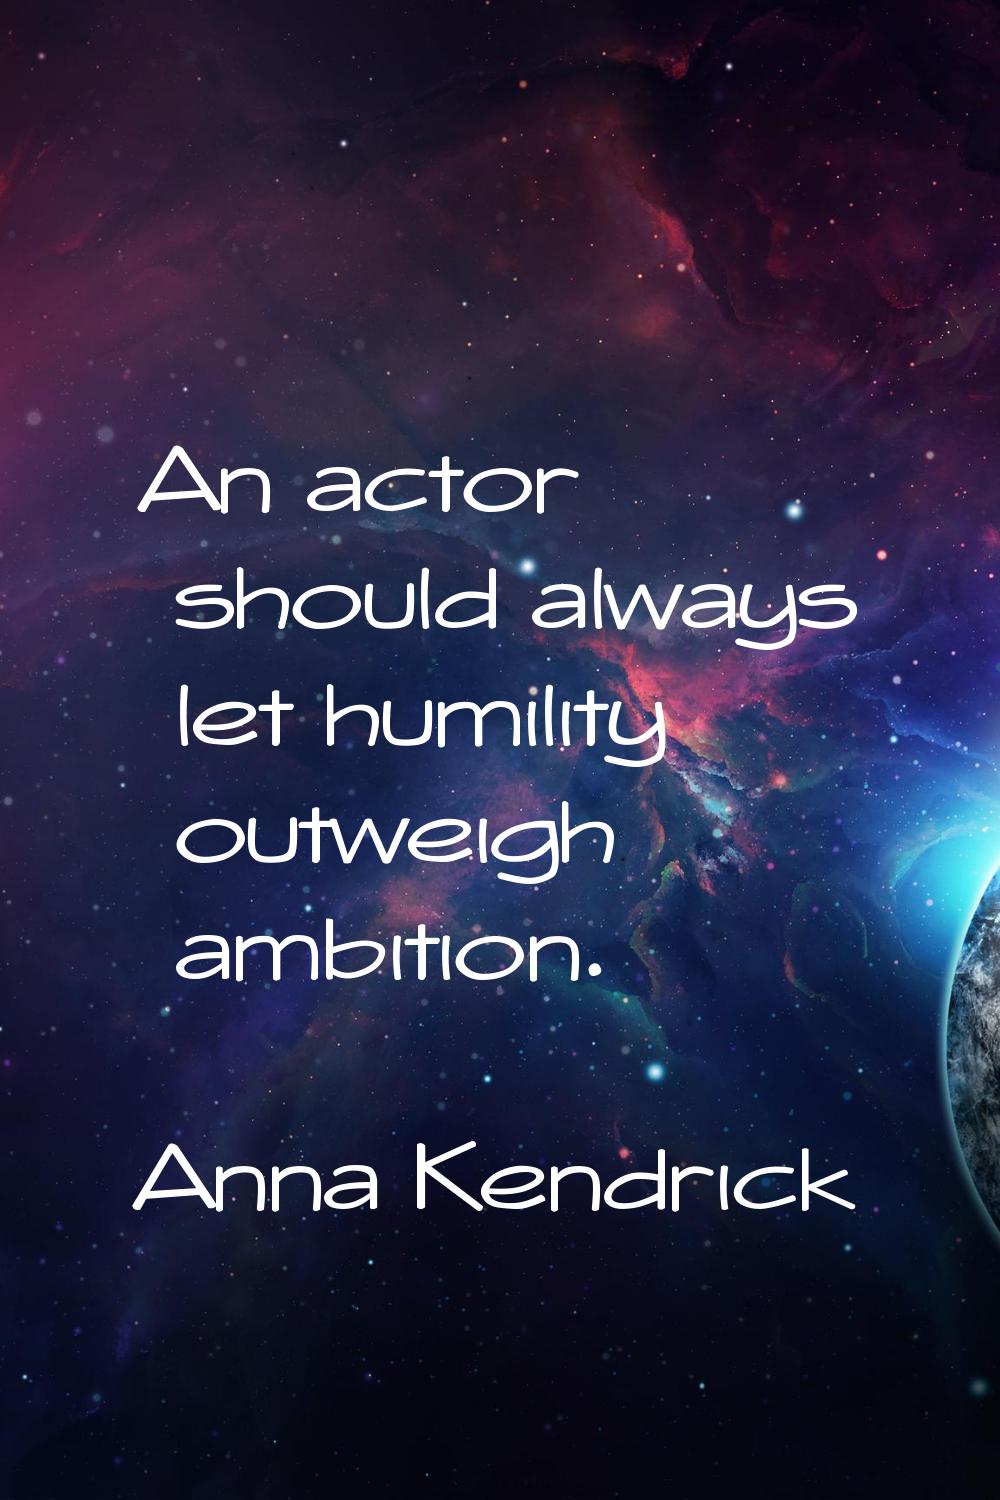 An actor should always let humility outweigh ambition.